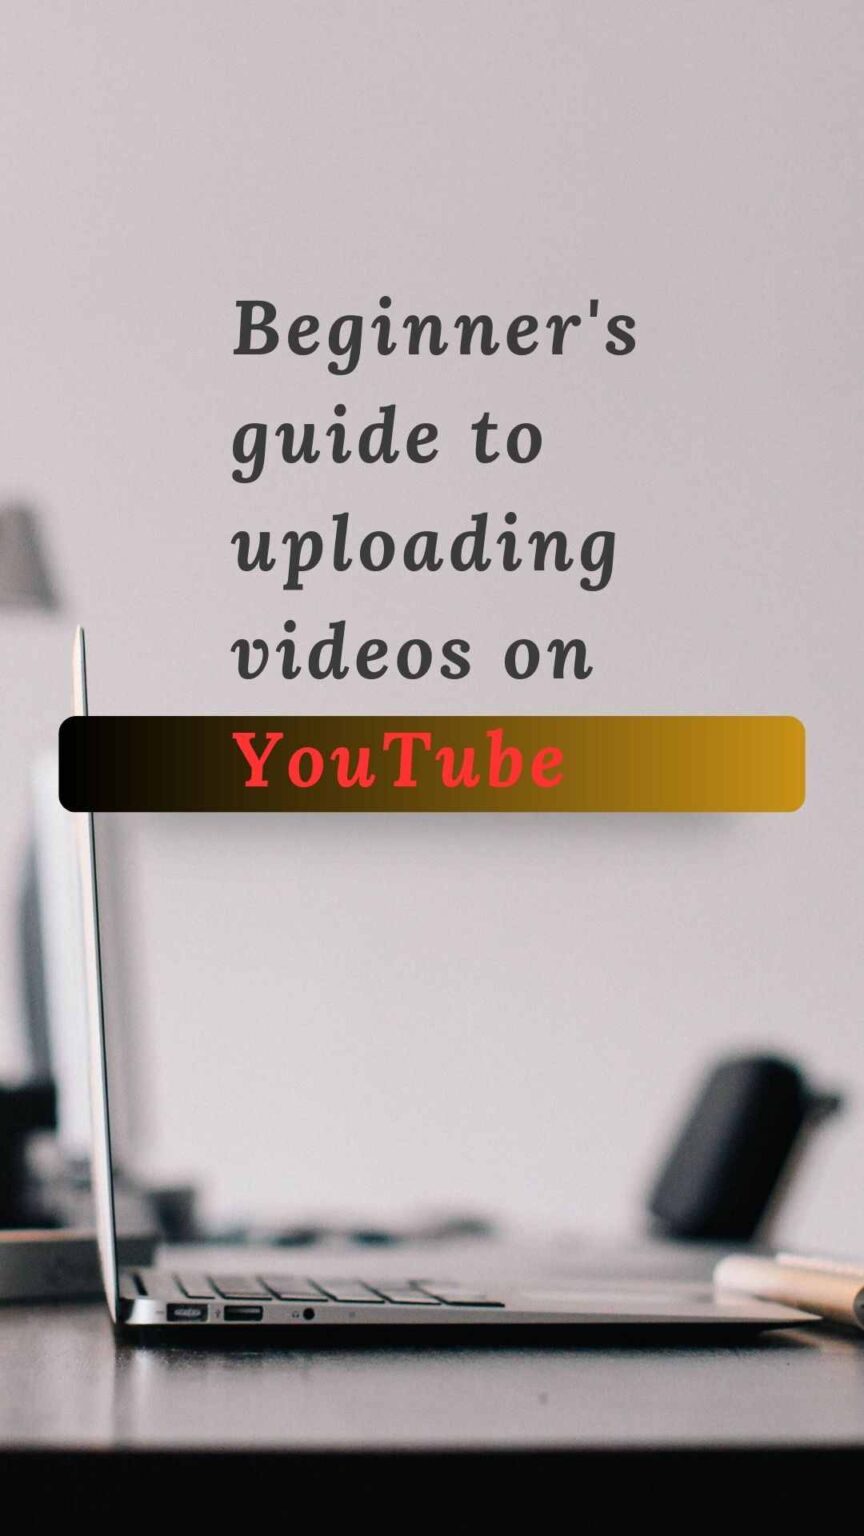 How to Upload a Video on YouTube